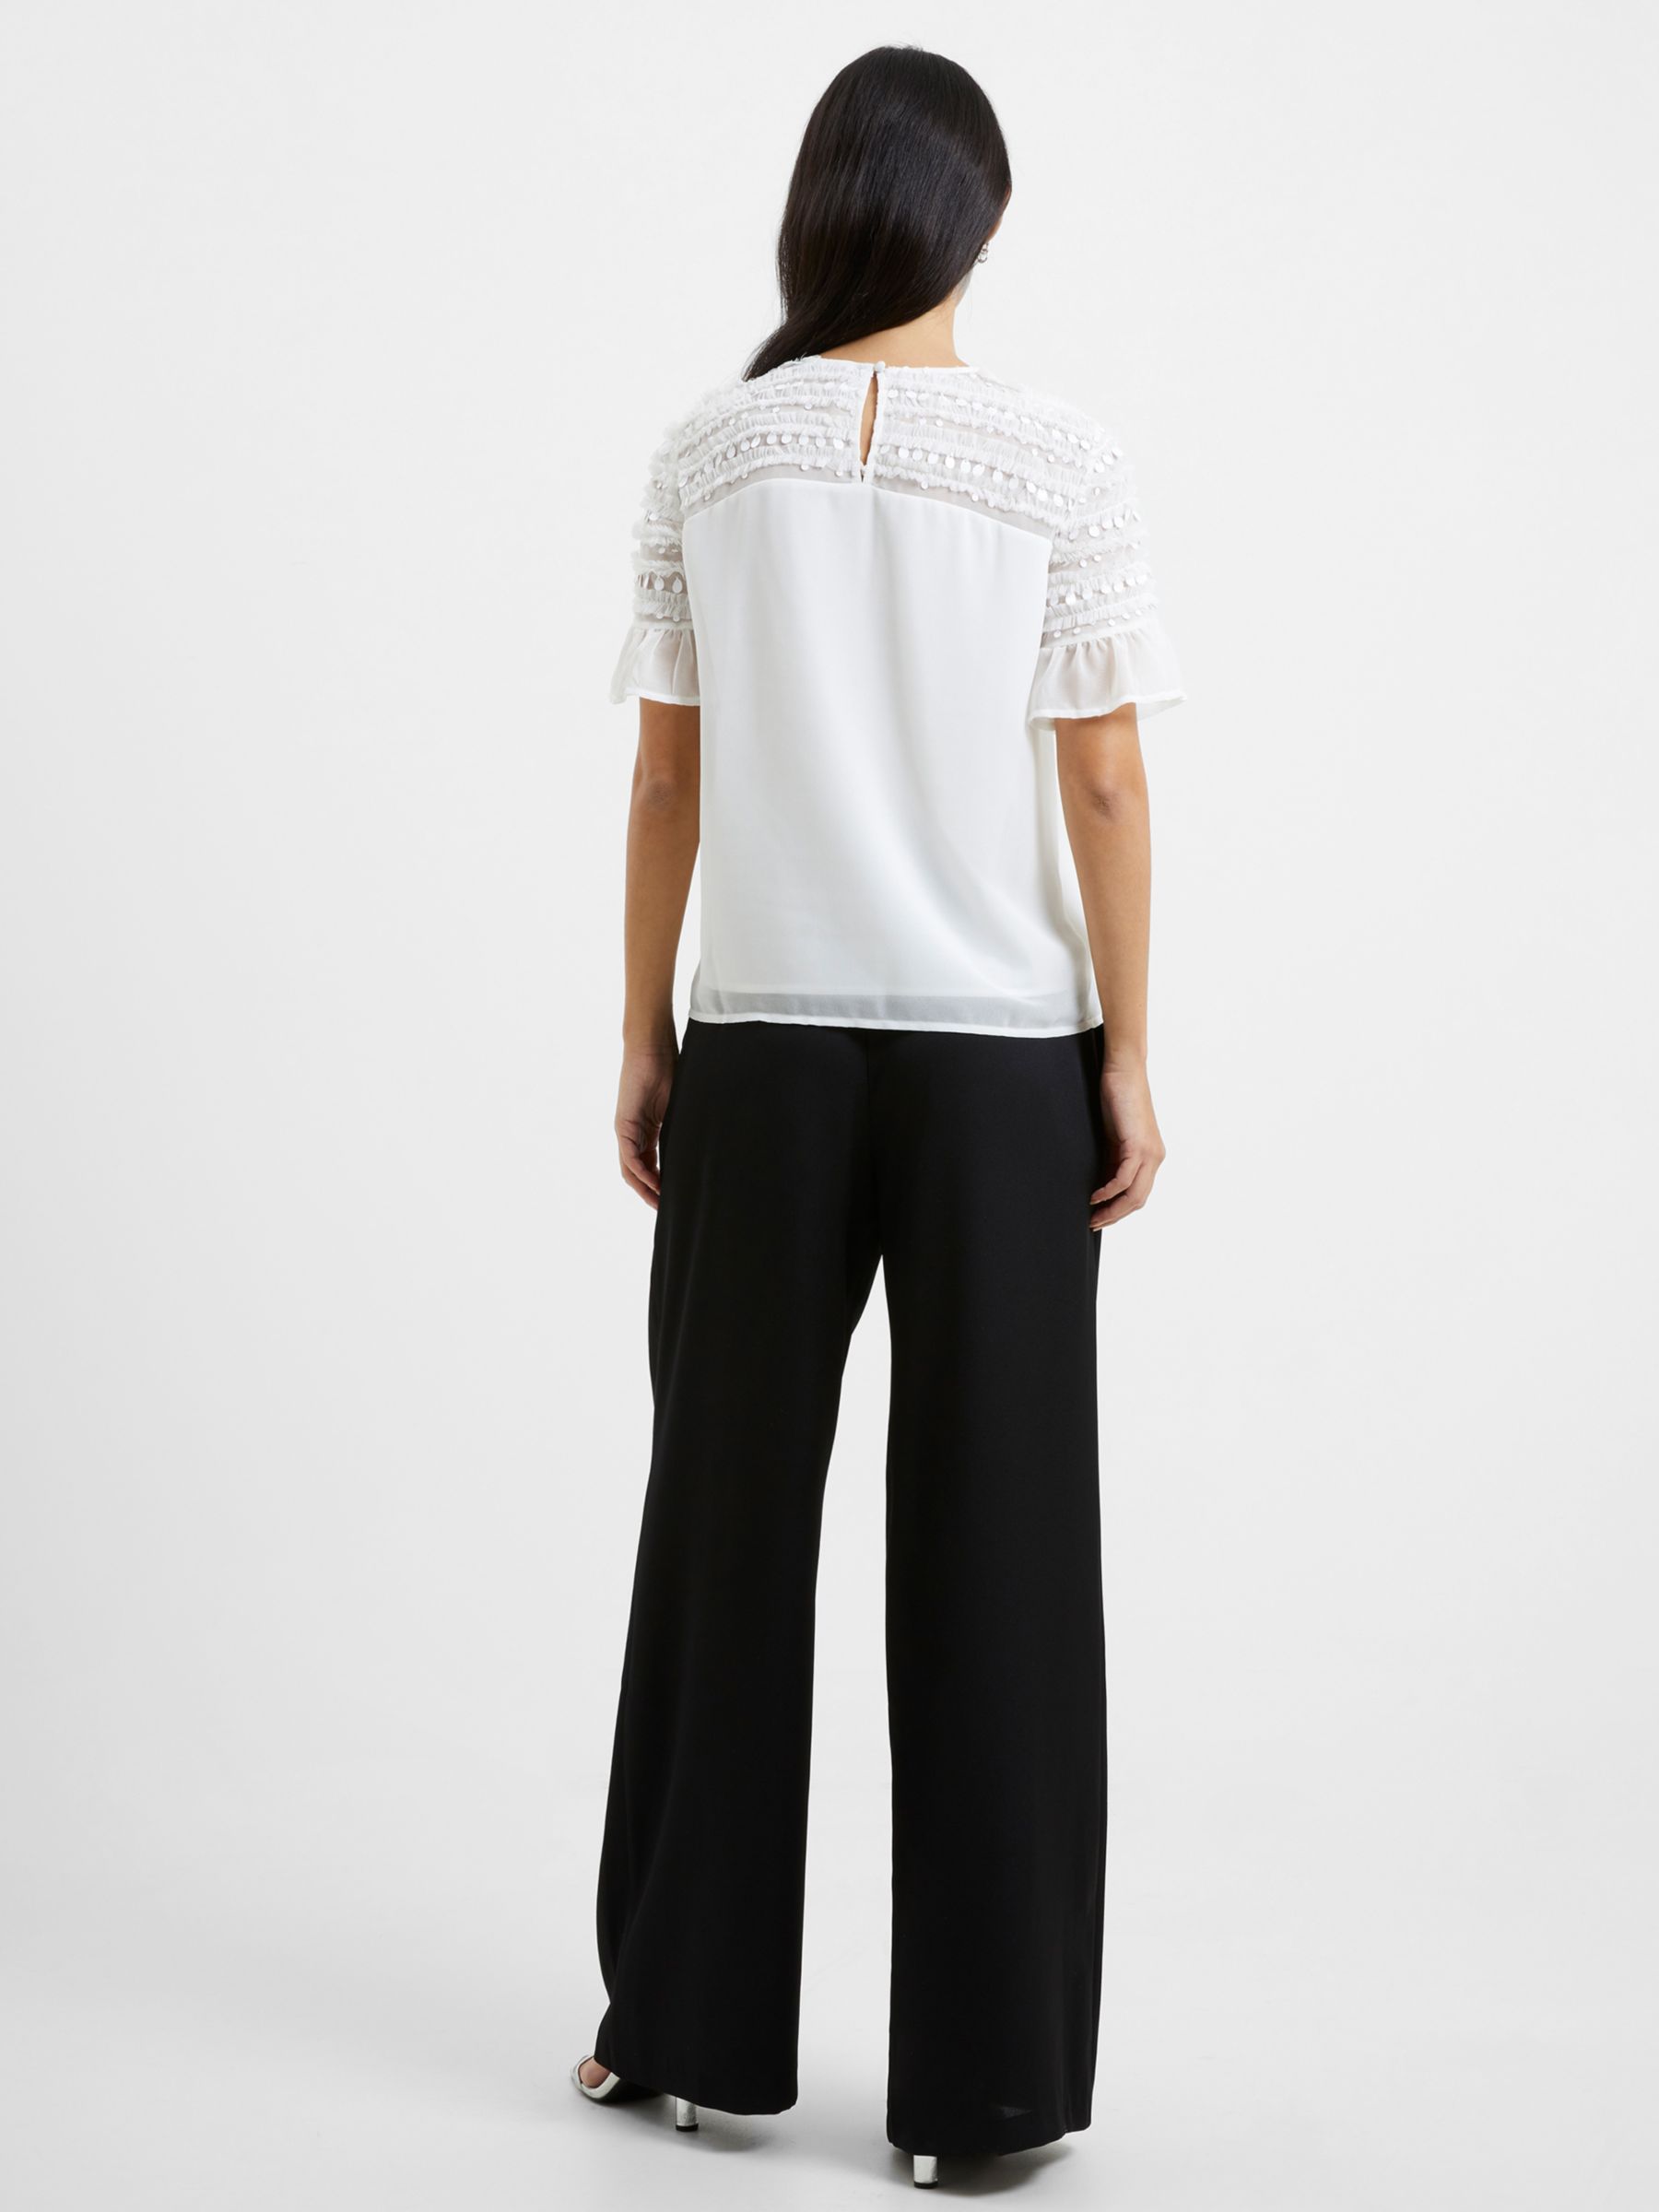 Buy French Connection Carina Mesh Frill Detail Top Online at johnlewis.com